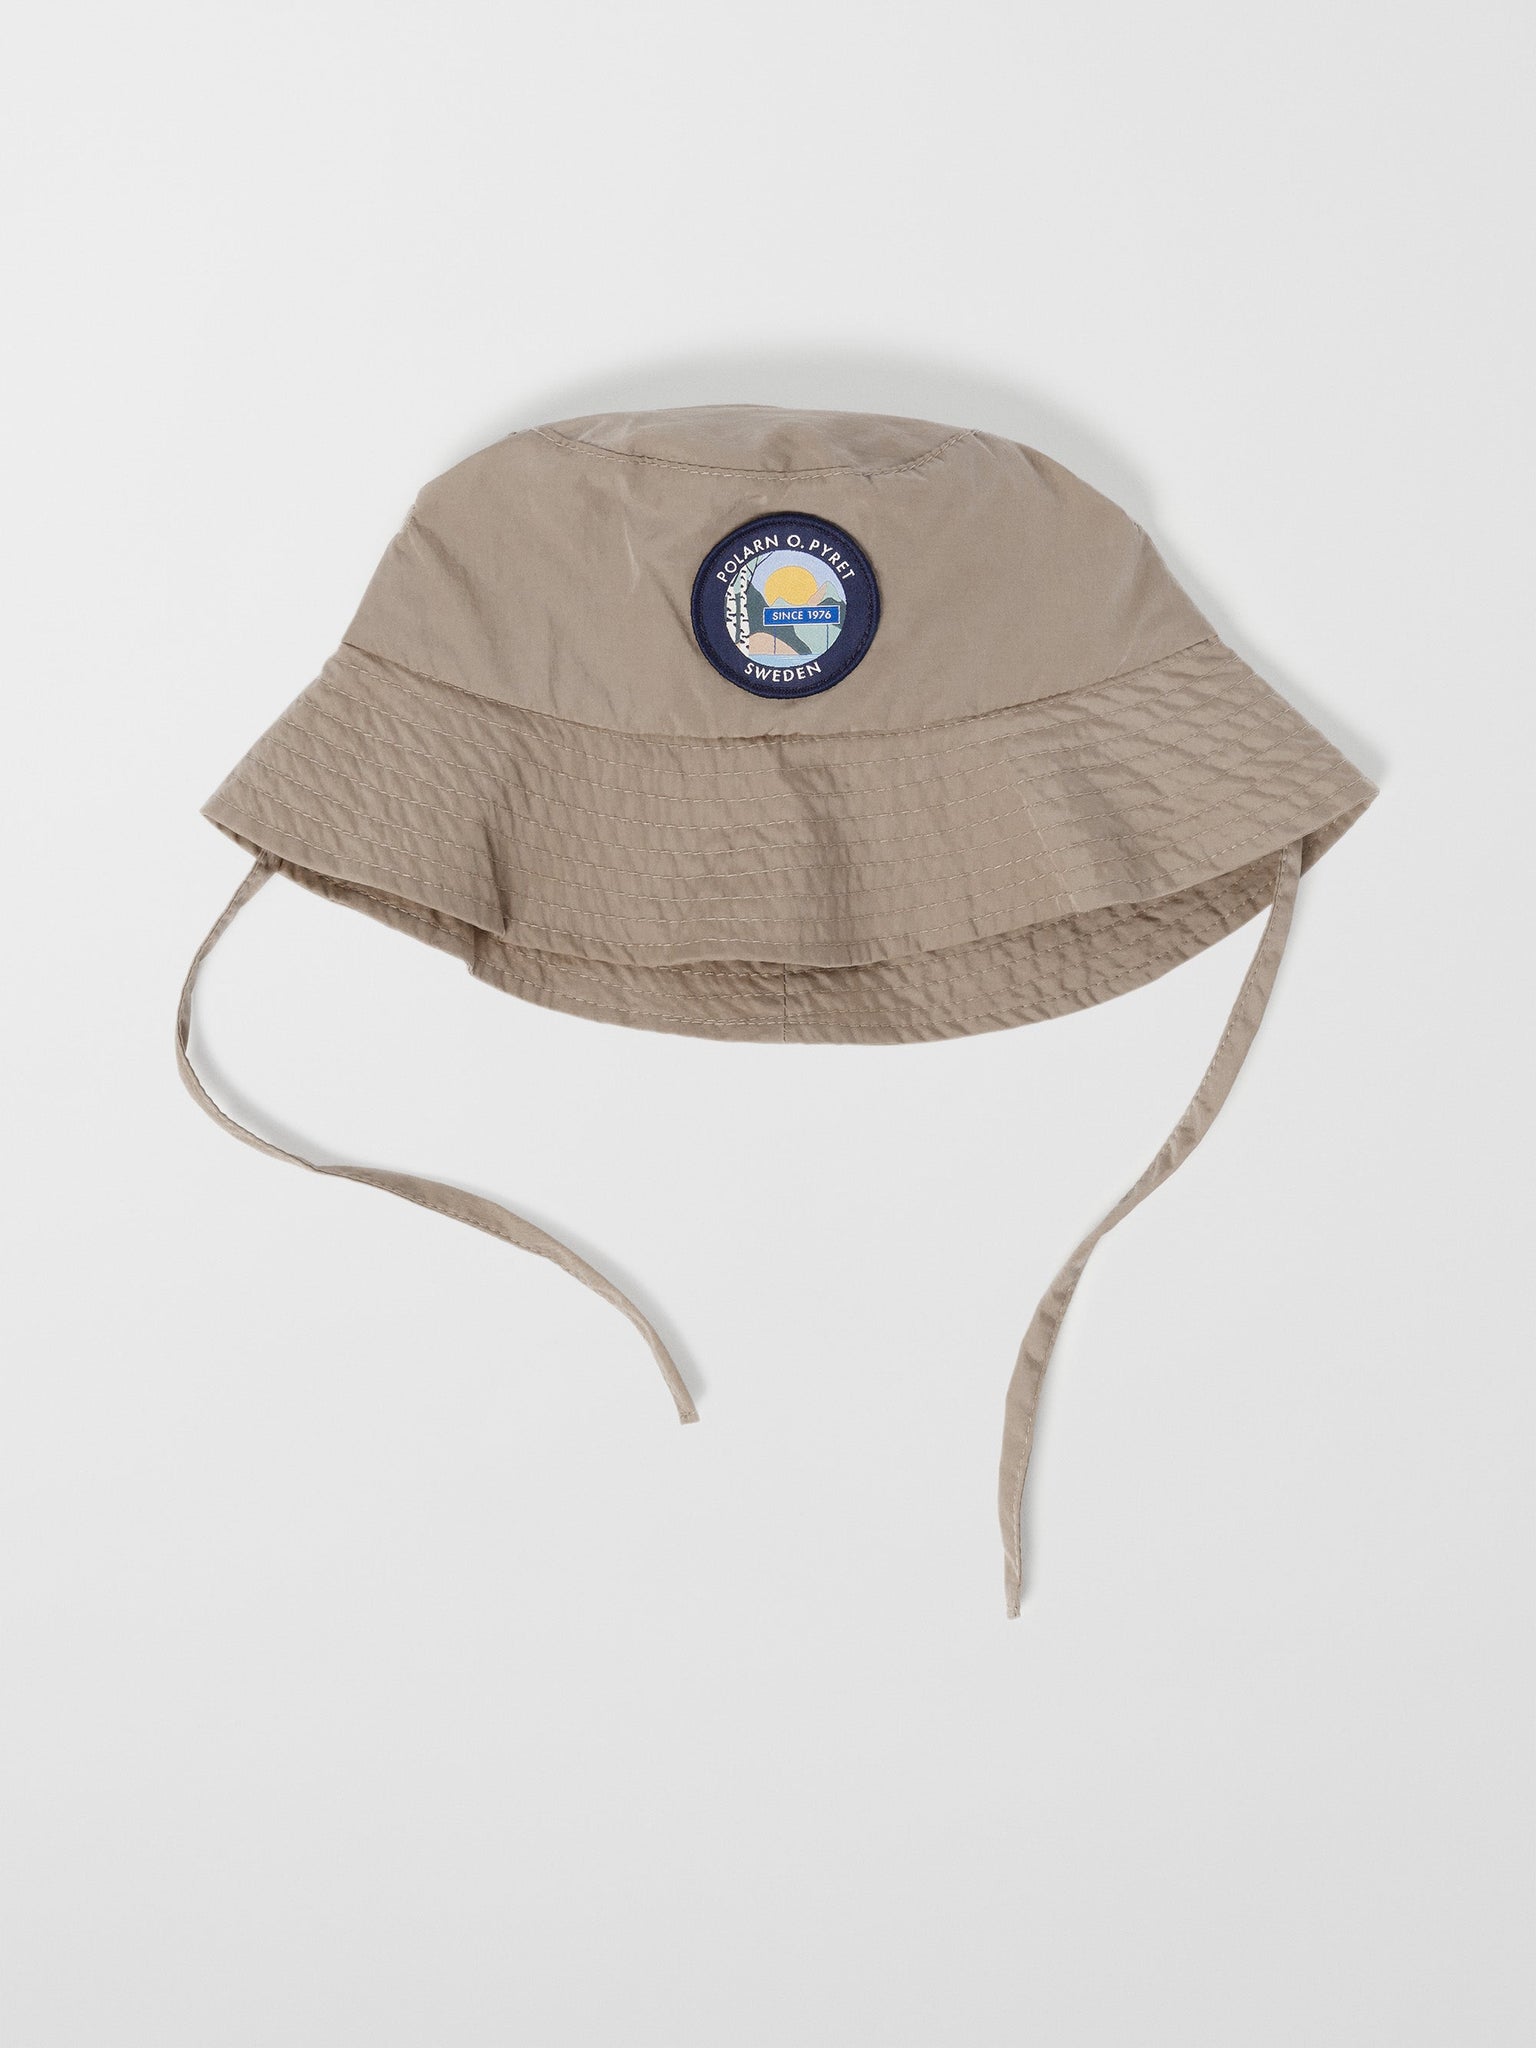 Kids Bucket Hat from the Polarn O. Pyret kidswear collection. Quality kids clothing made to last.